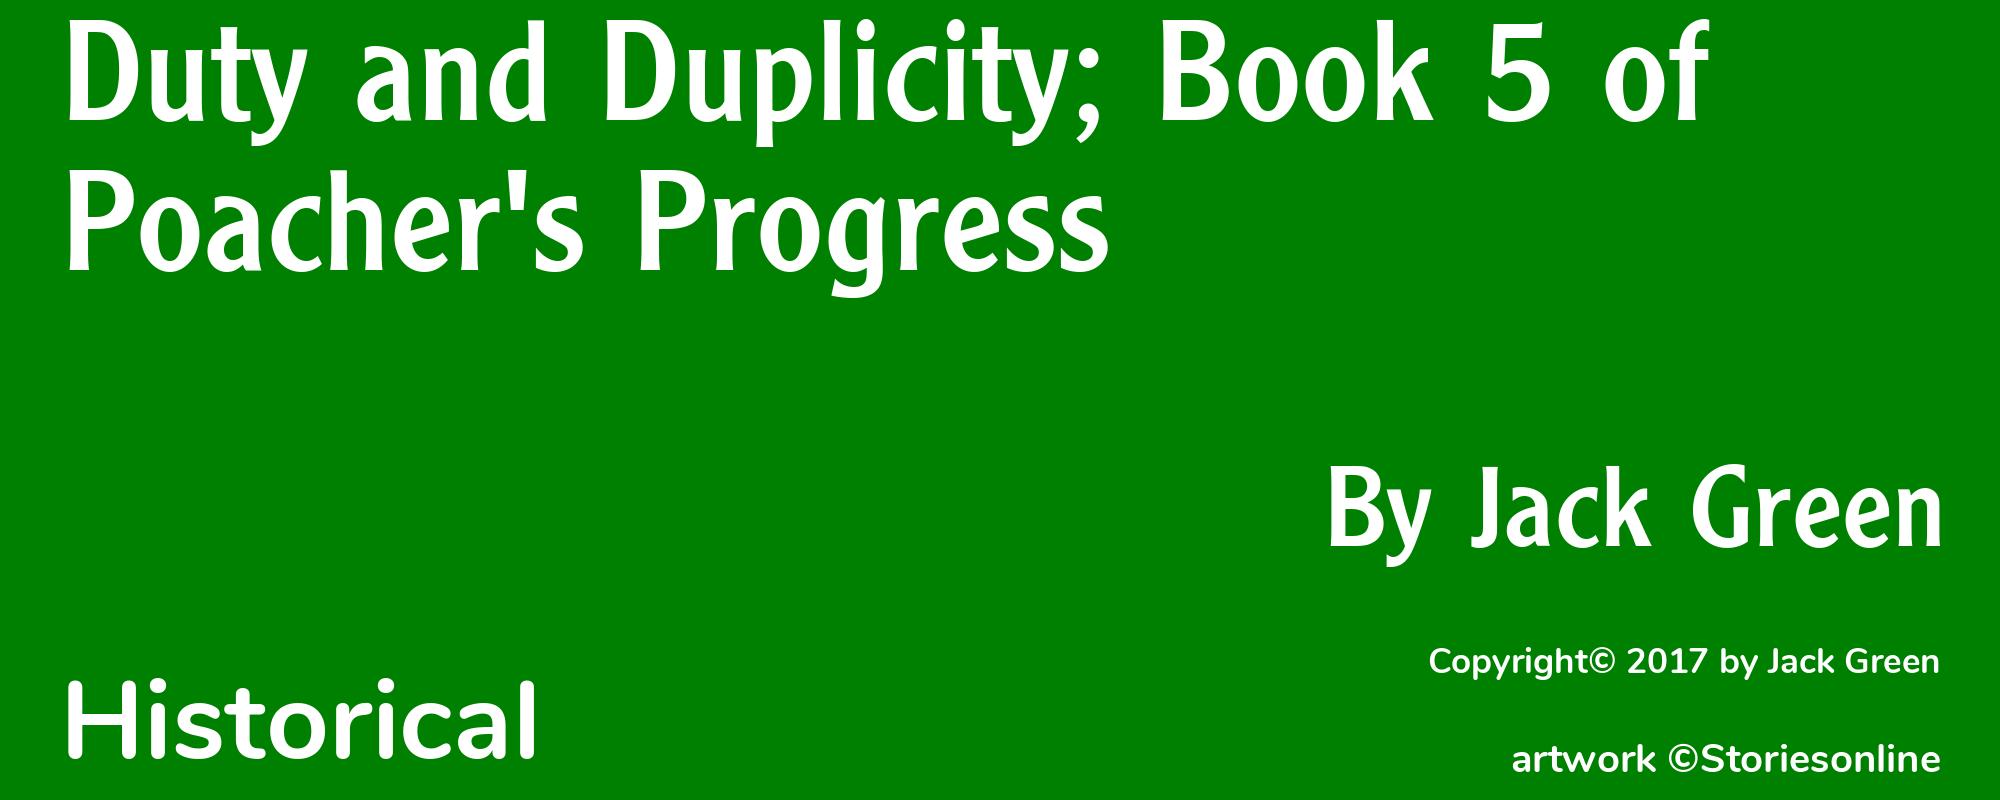 Duty and Duplicity; Book 5 of Poacher's Progress - Cover